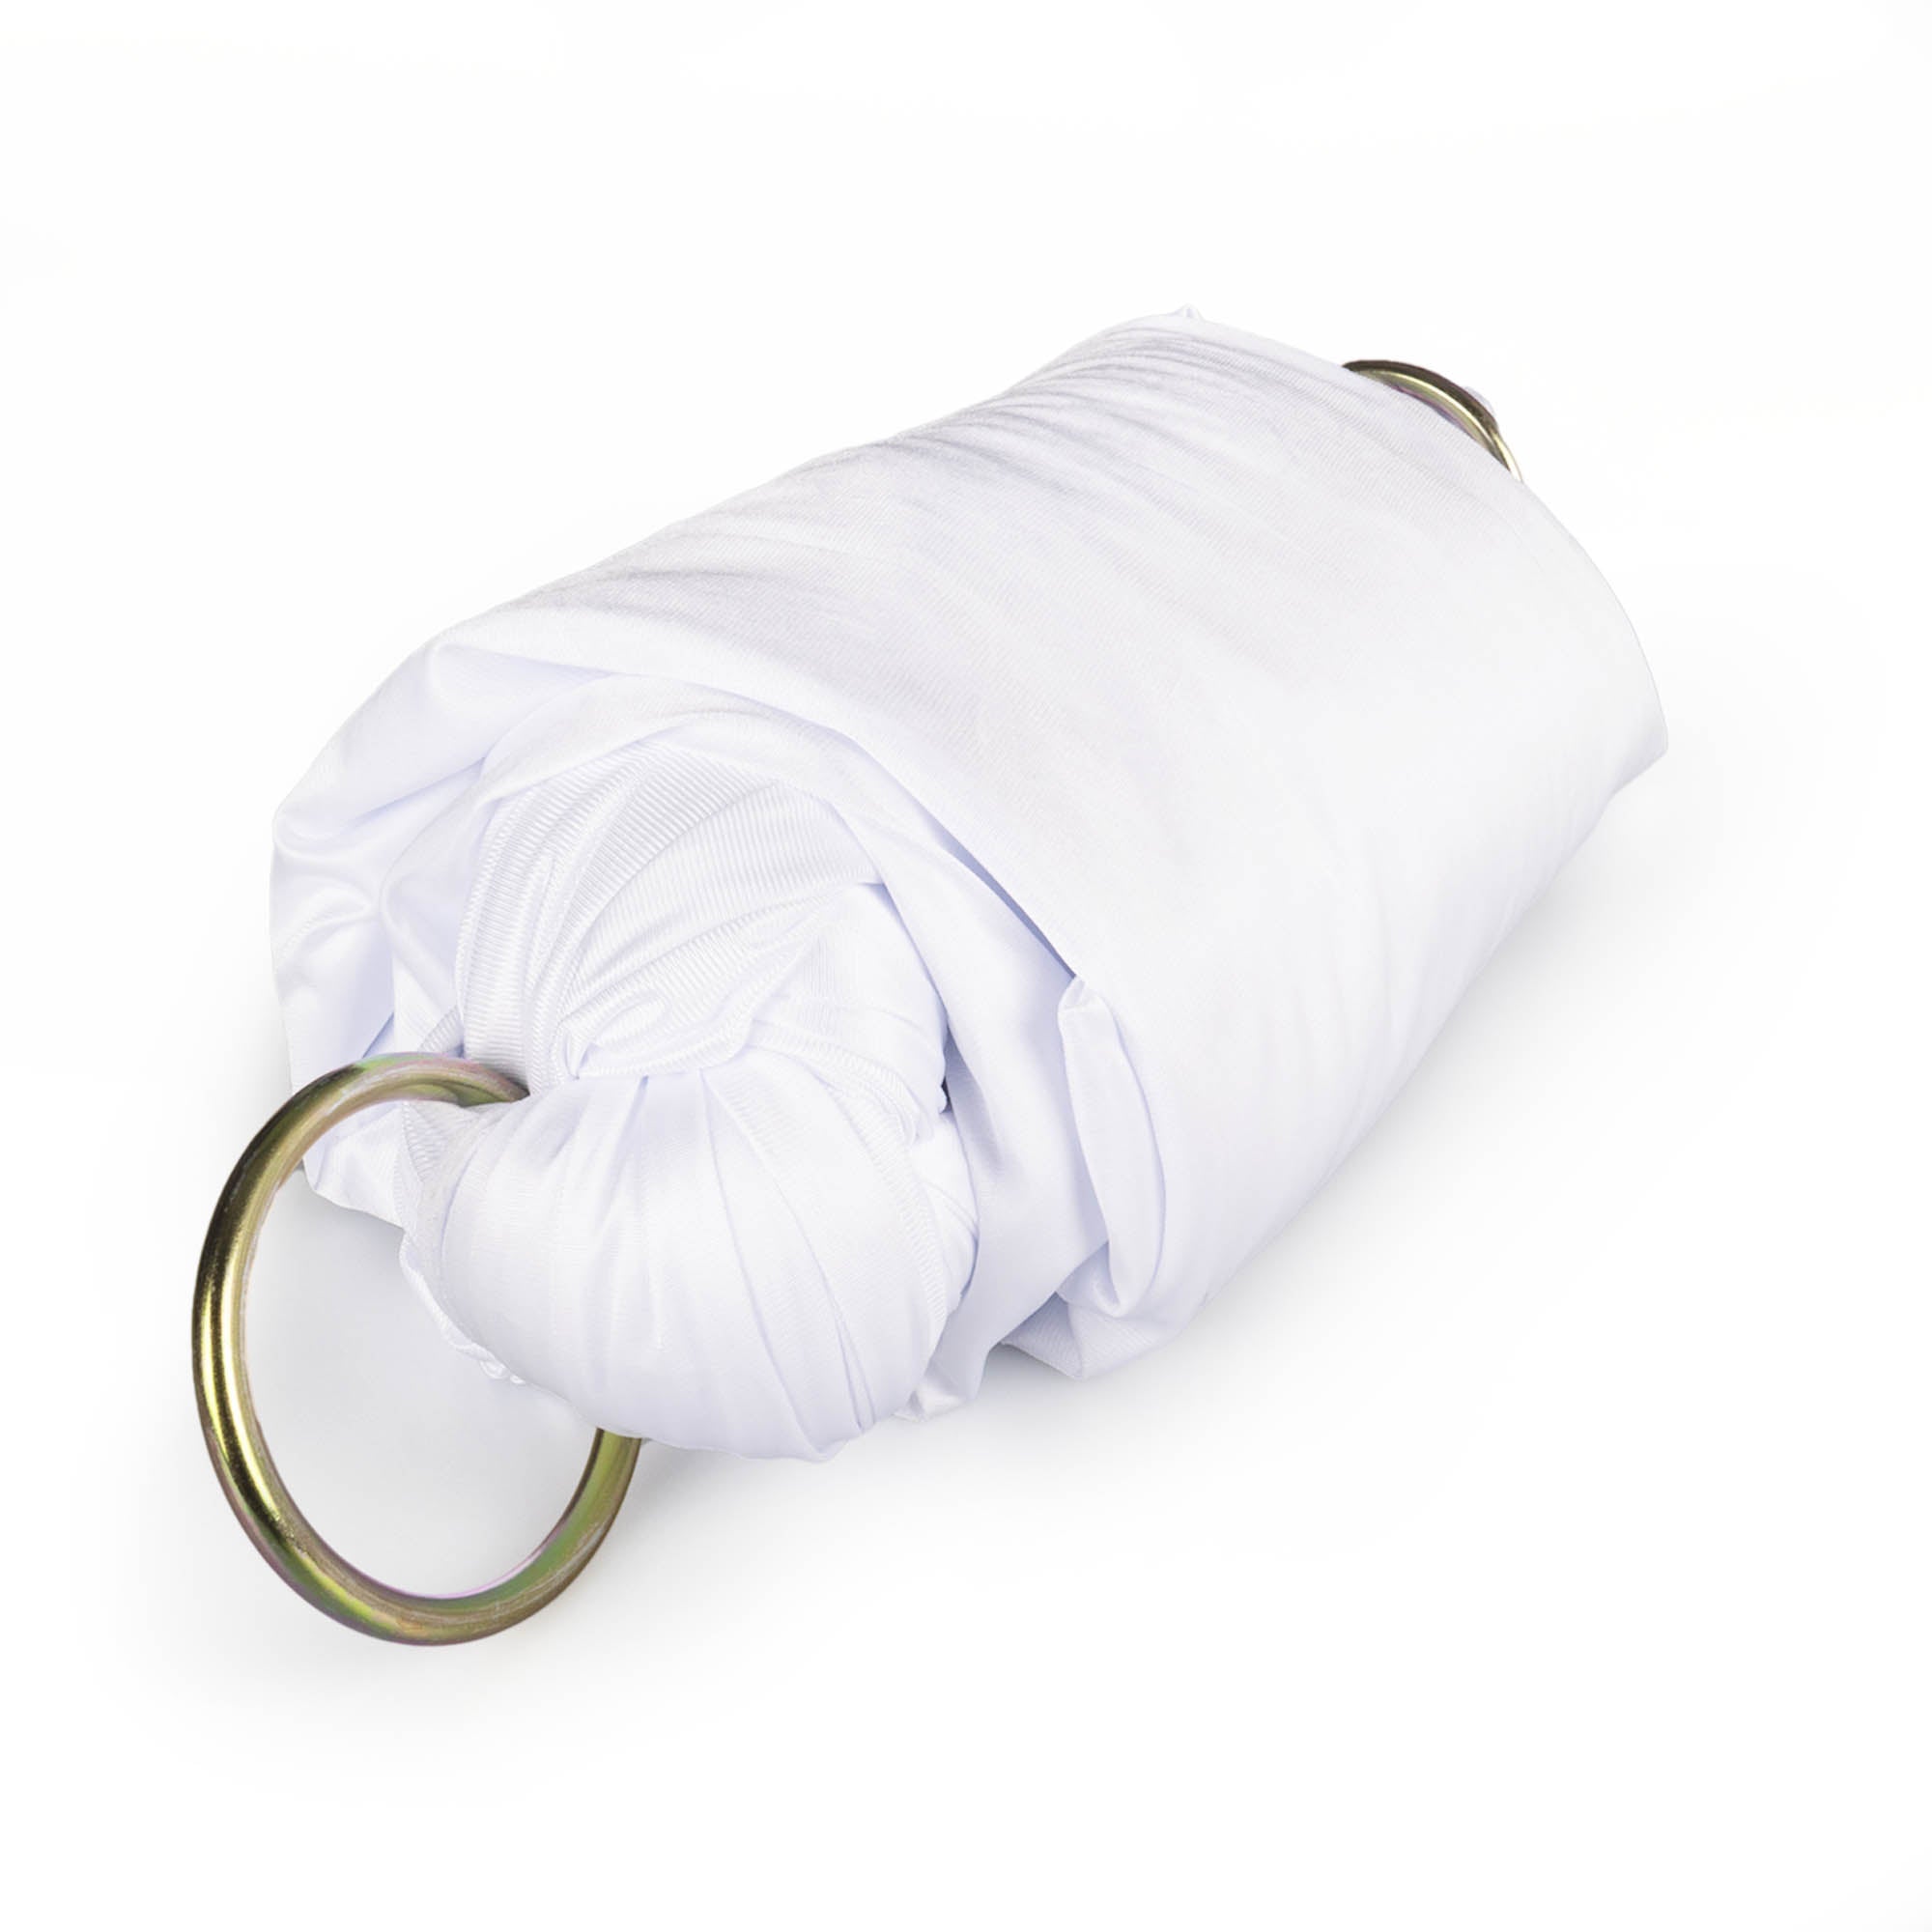 White yoga hammock with O rings attached